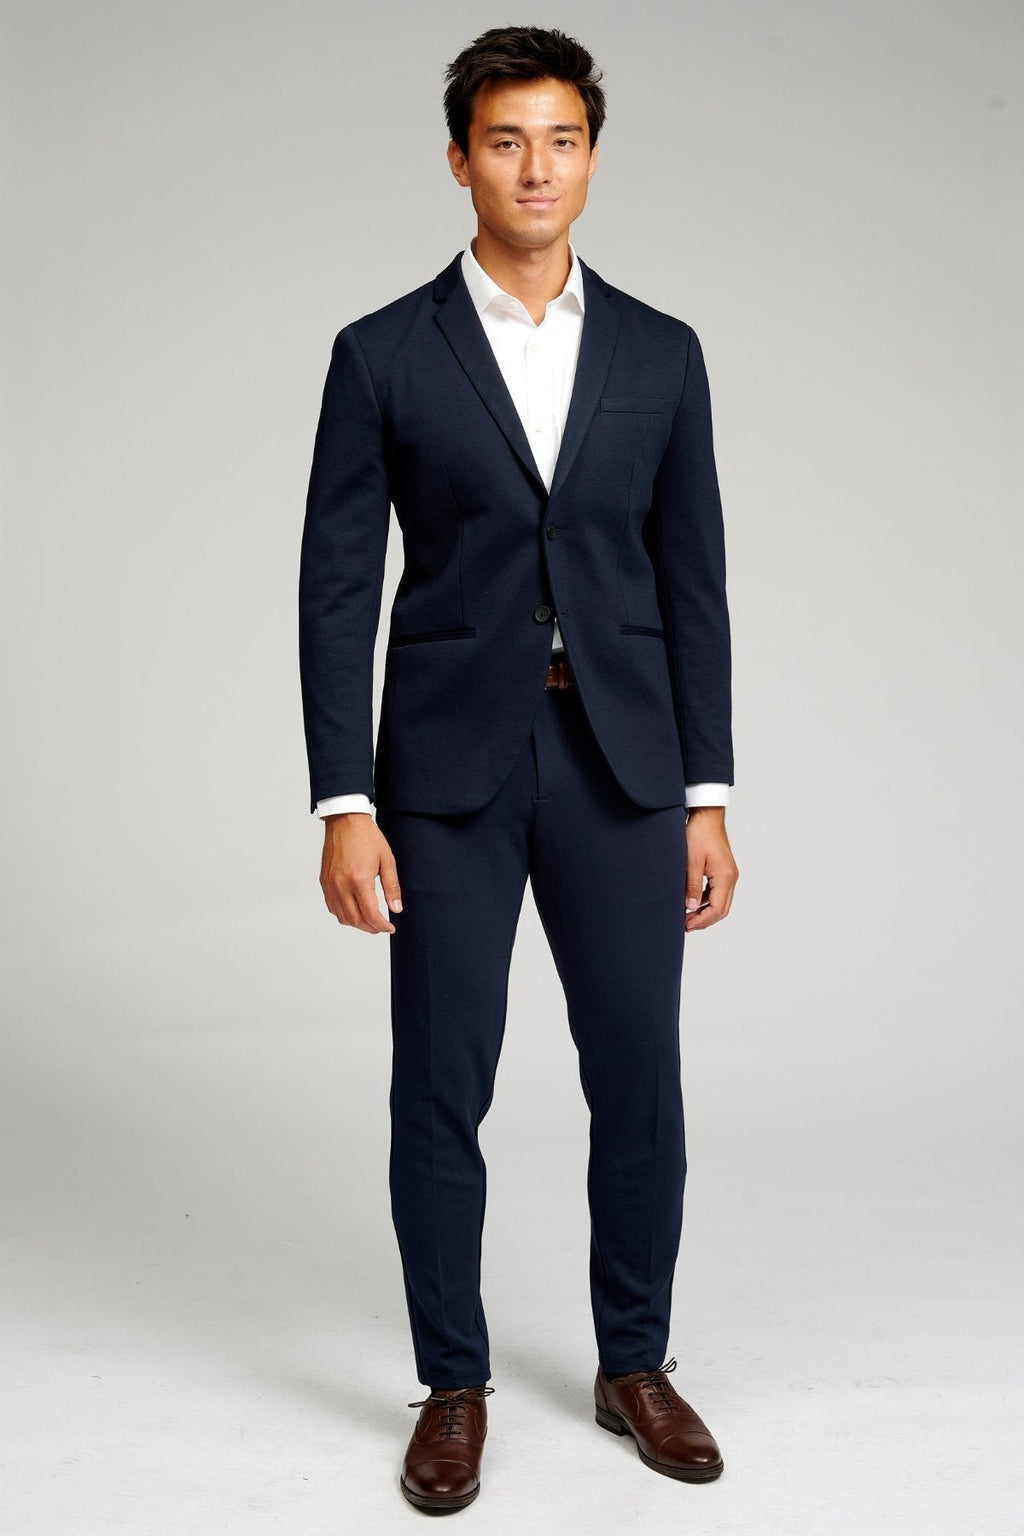 The Original Performance Suit™️ (Navy) + Shirt & Tie - Package Deal (V.I.P)